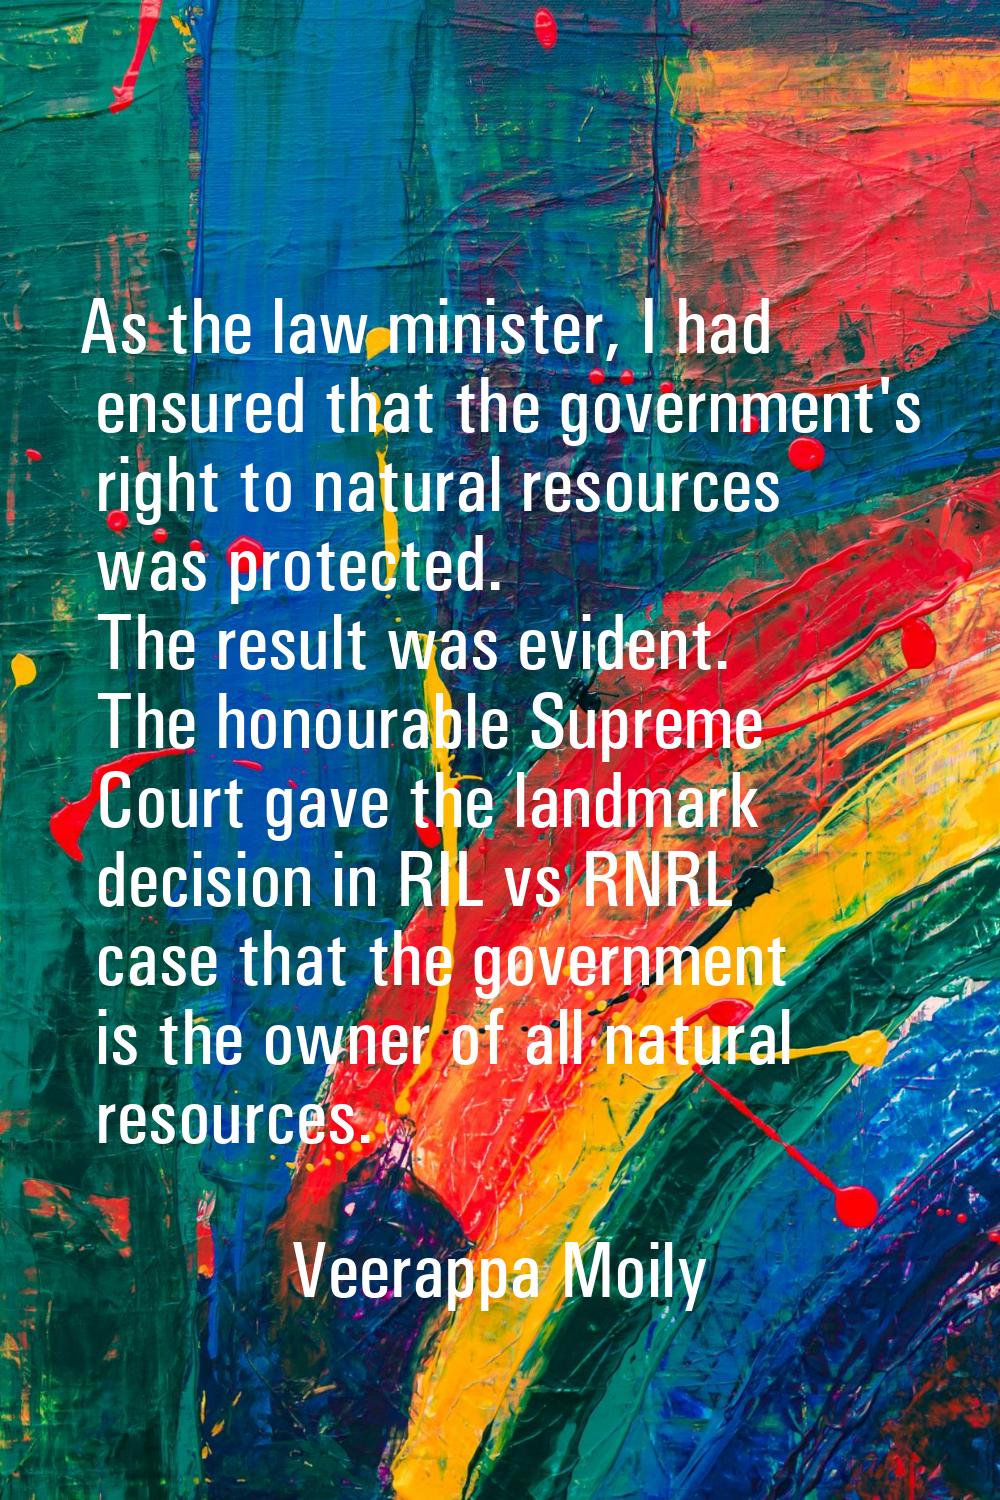 As the law minister, I had ensured that the government's right to natural resources was protected. 